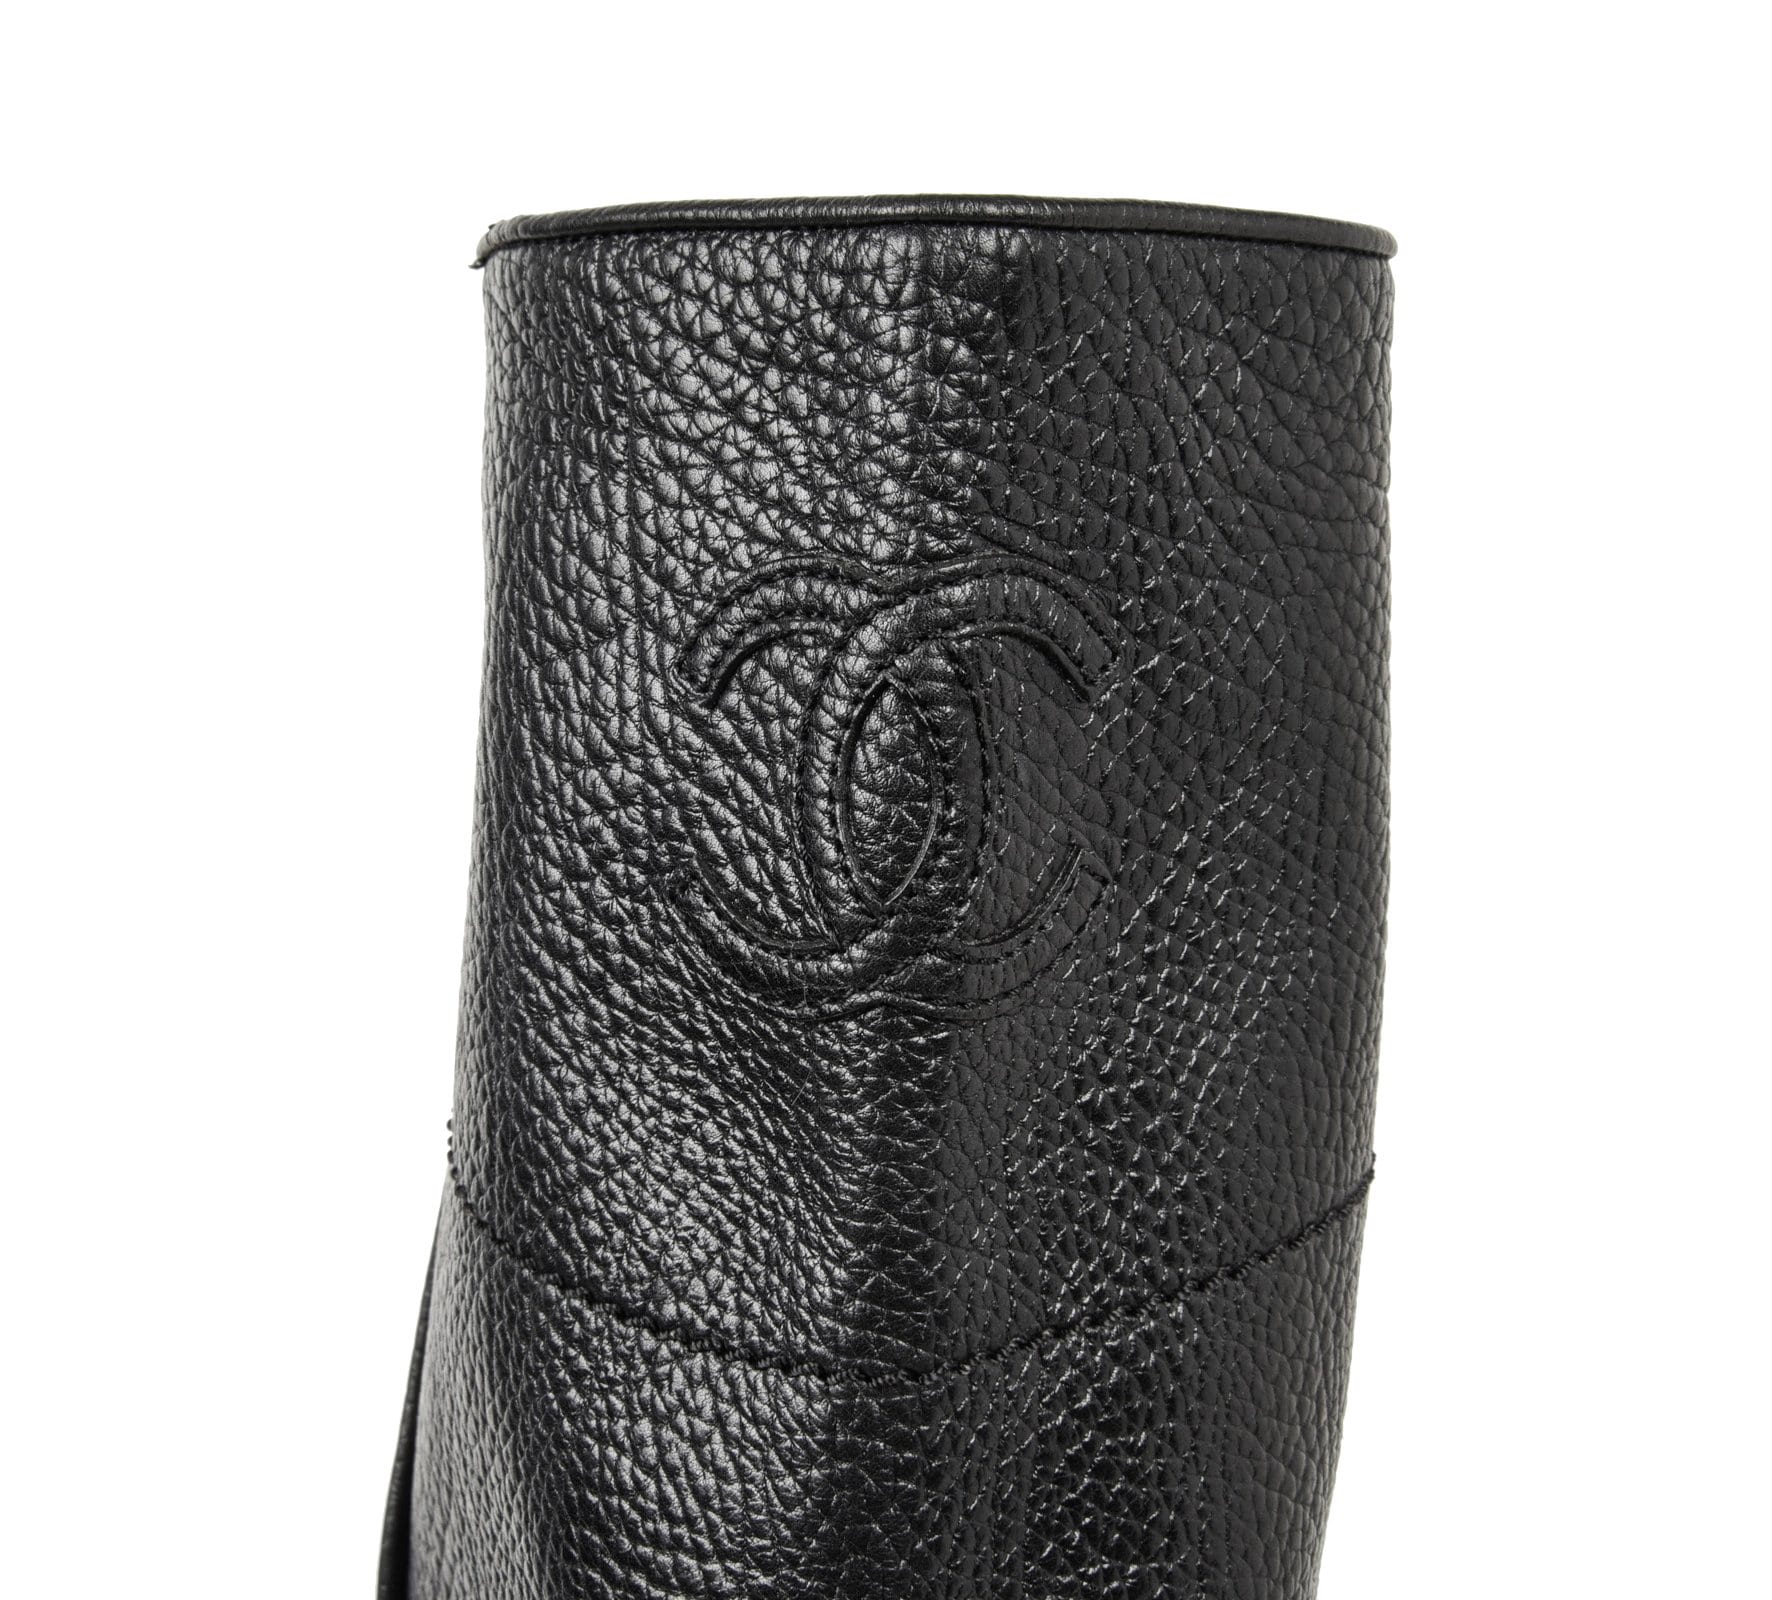 Chanel Boot Black Textured Leather Flat Knee High CC Logo 39.5 / 9.5 - mightychic